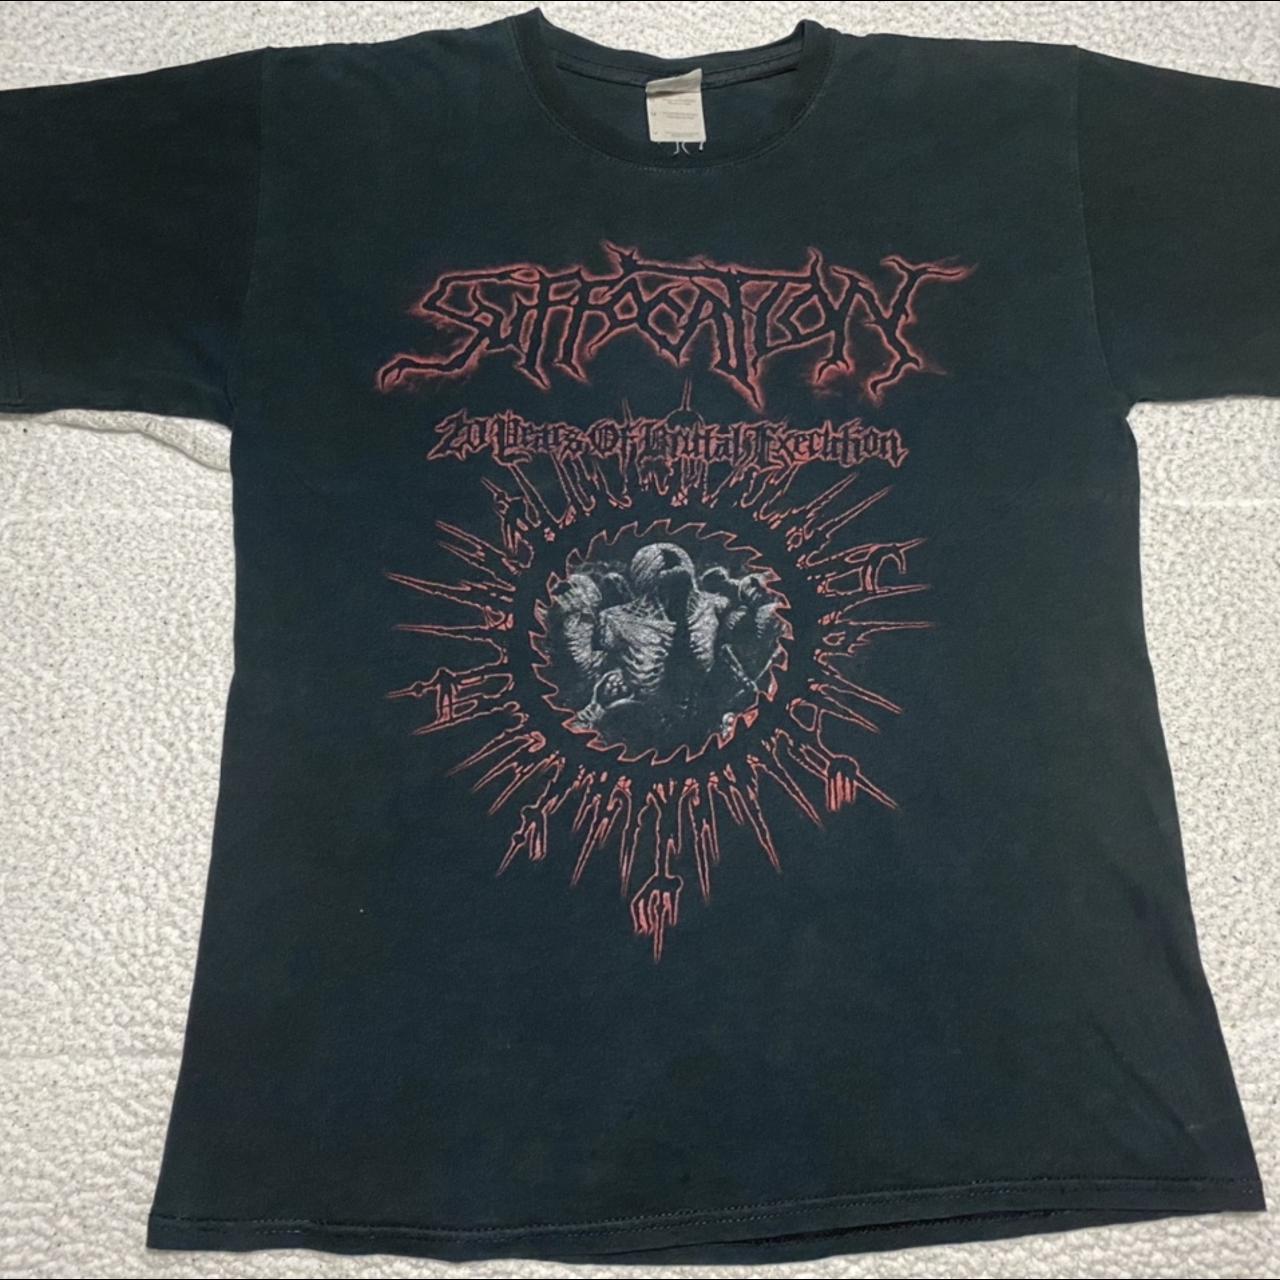 Suffocation “20 Years of Brutal Execution” shirt,... - Depop